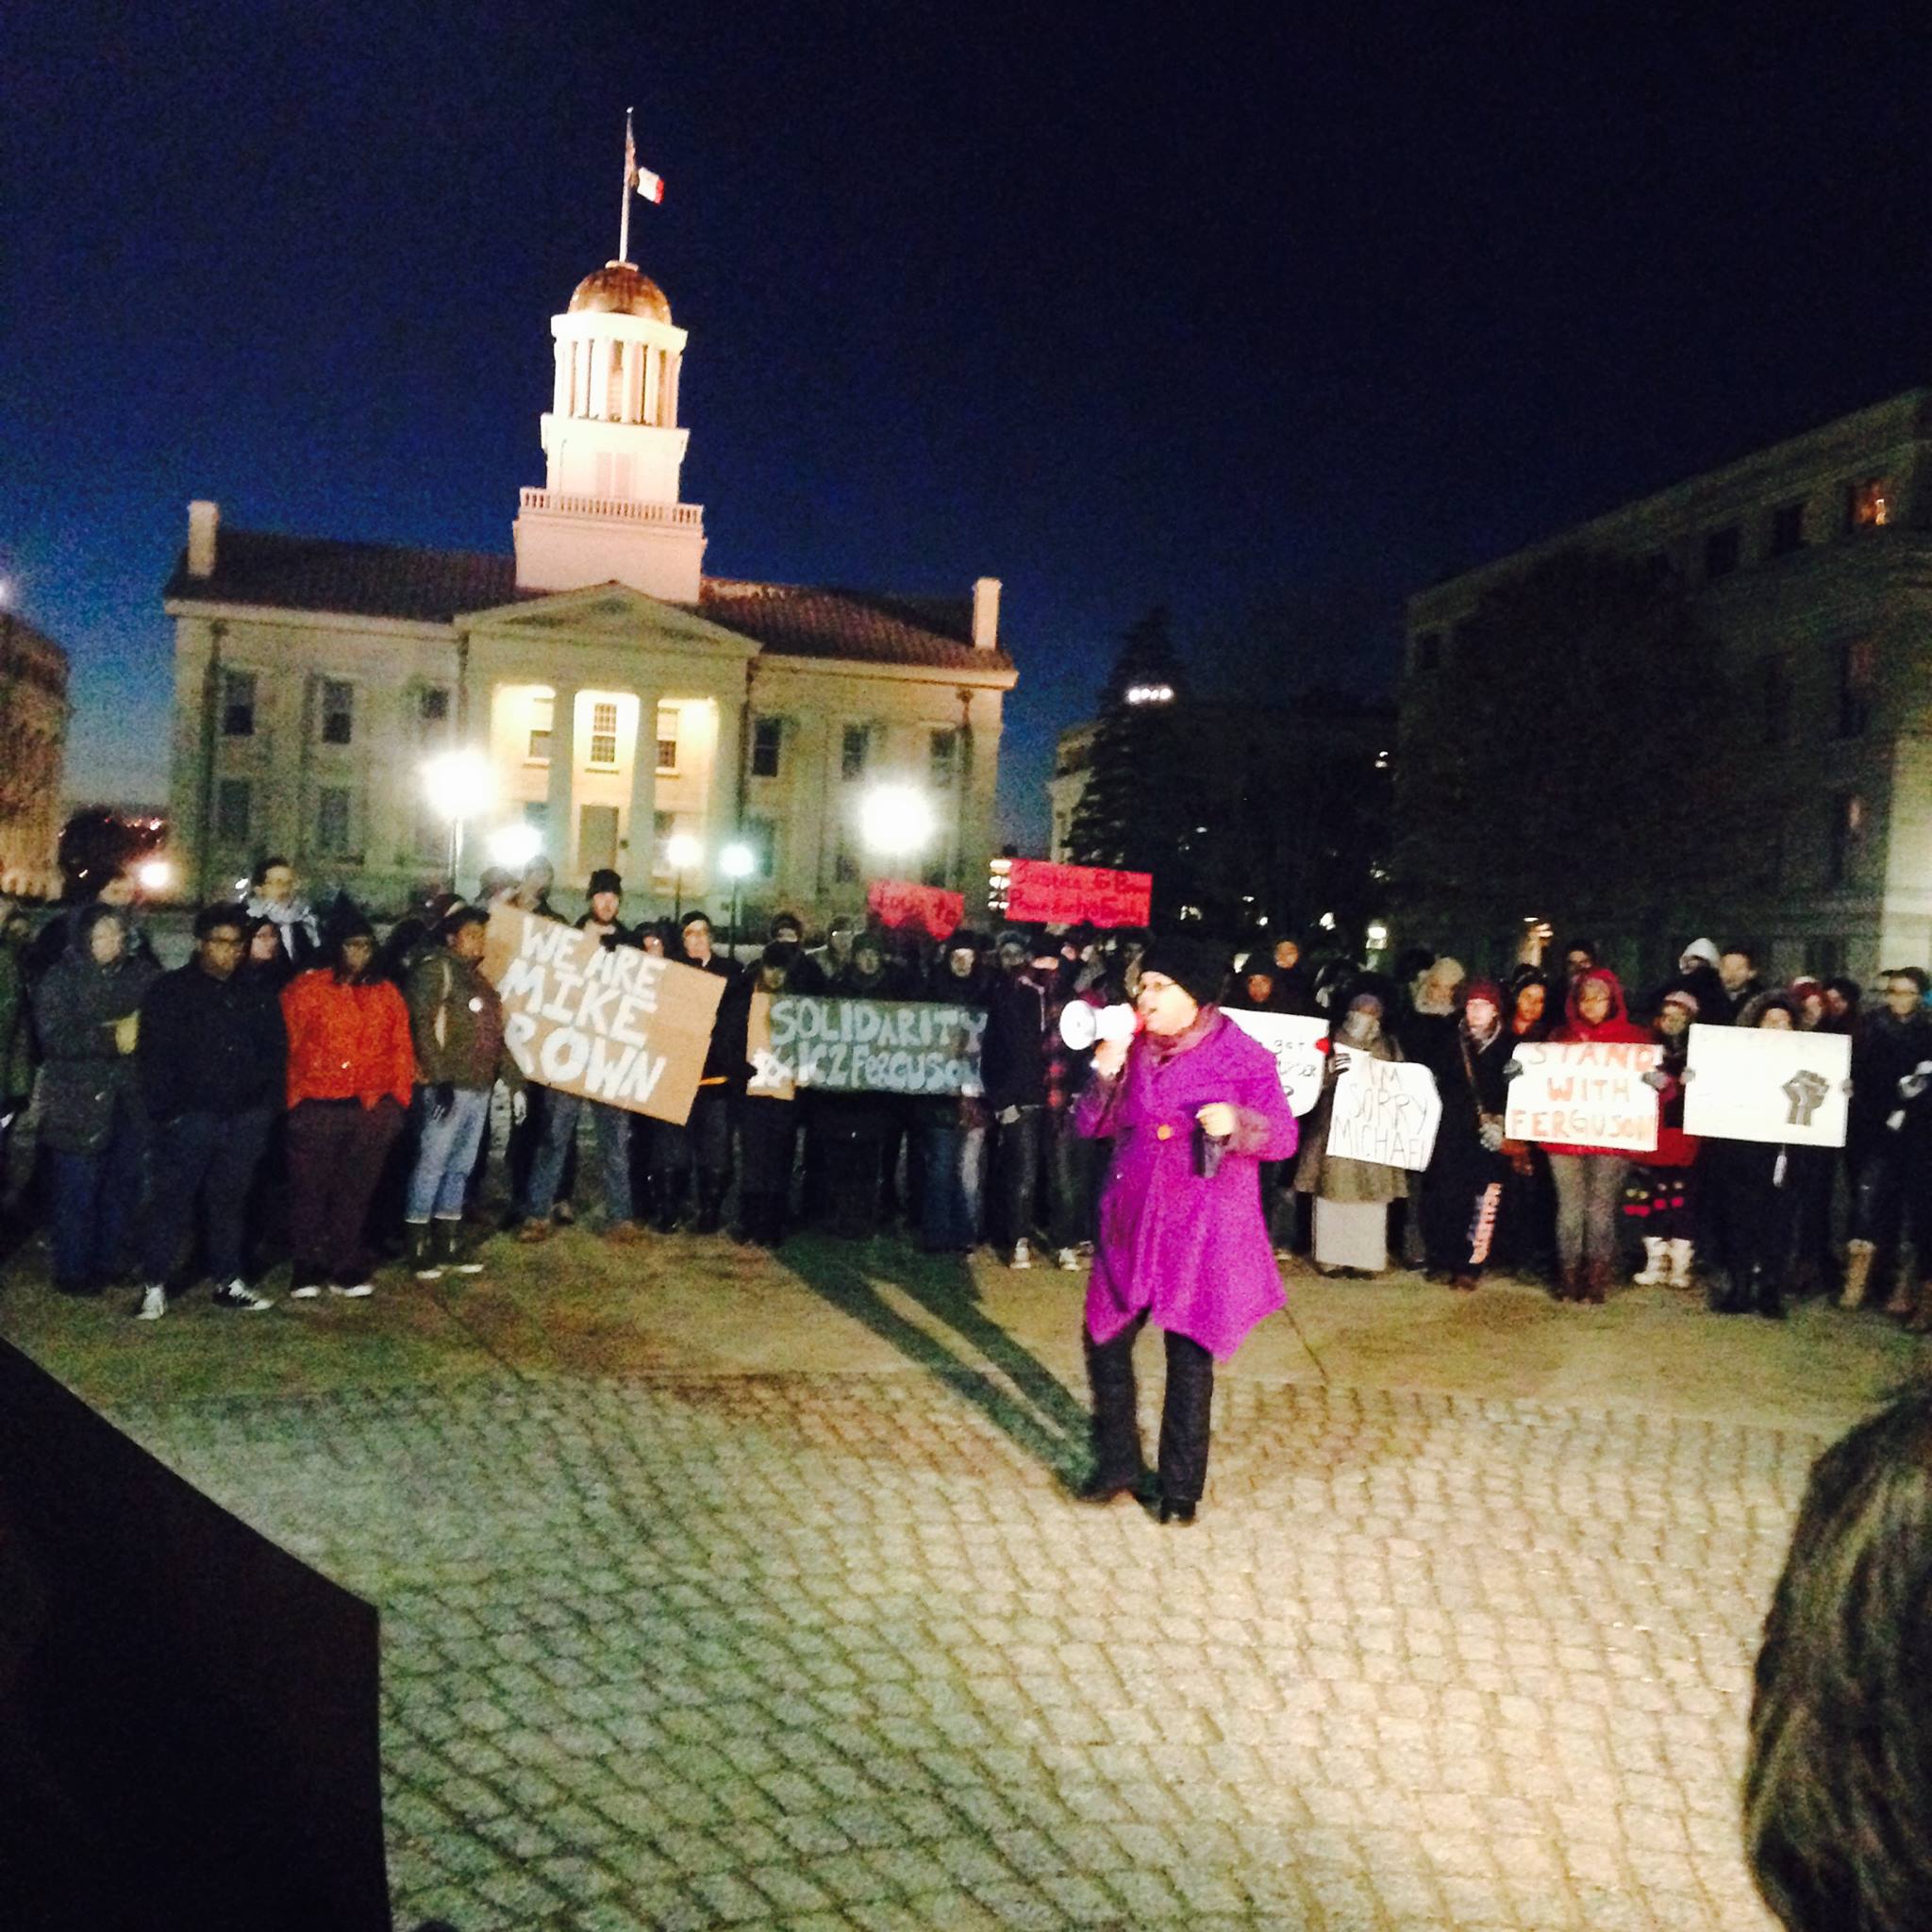 Image of letter author, Kendra Malone, holding a megaphone at a rally on the Pentacrest at the University of Iowa (2014)